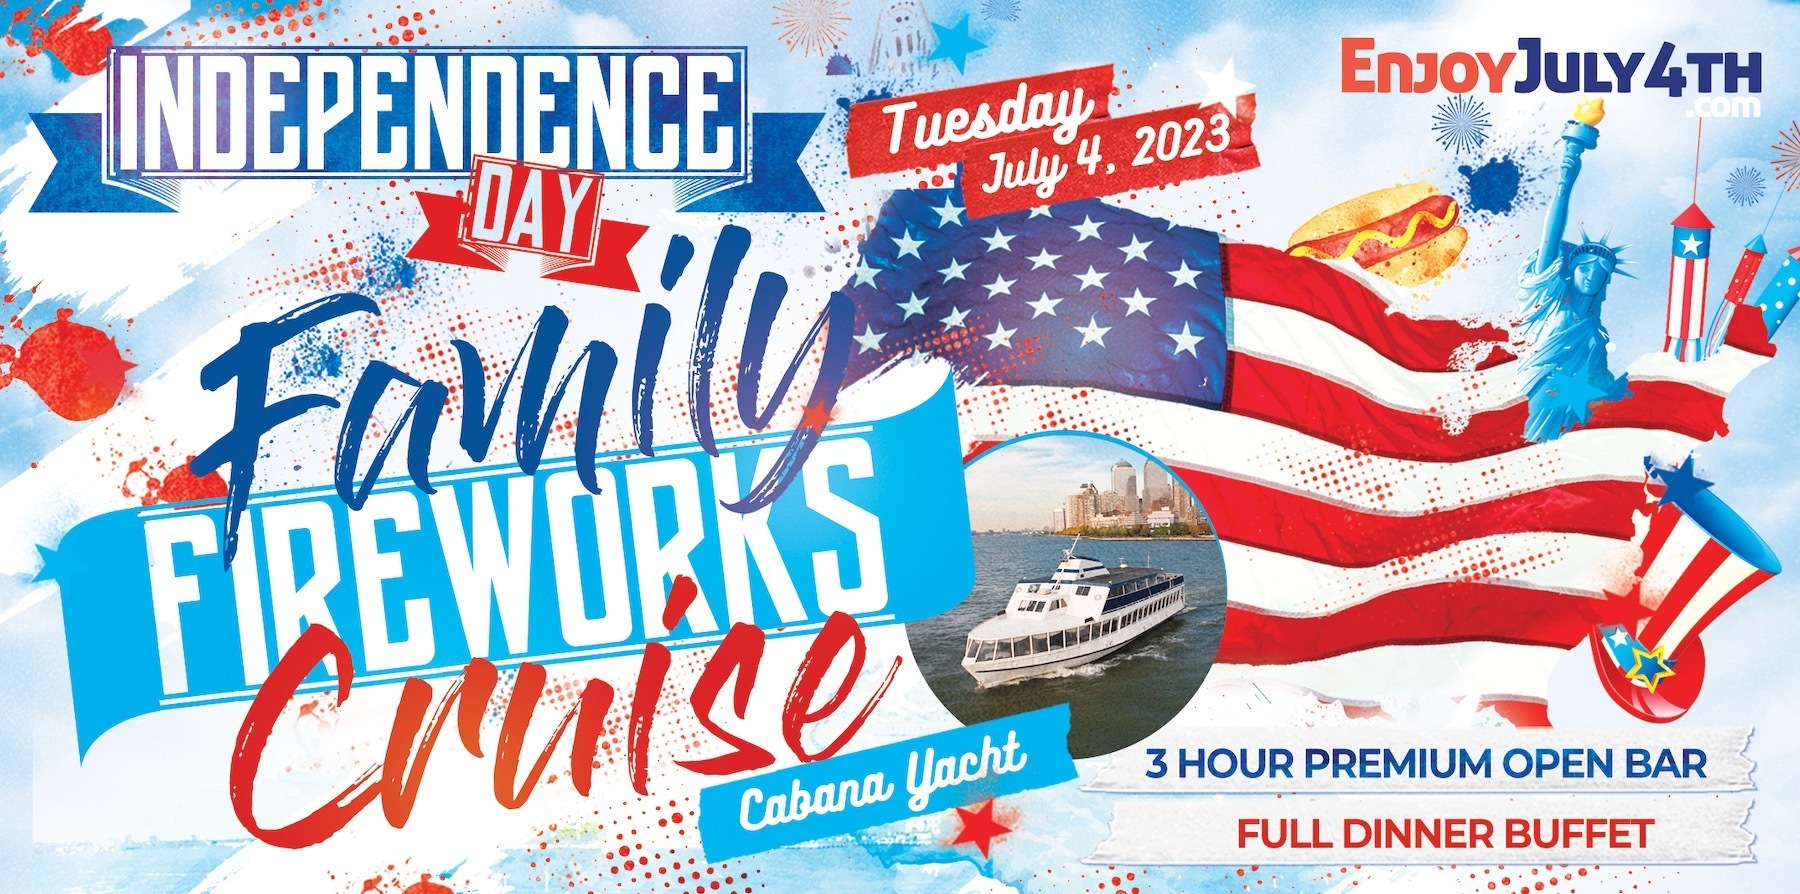 4th of July Family Fireworks Cruise in New York City aboard the Cabana Yacht - Tuesday July 4, 2023, New York, United States